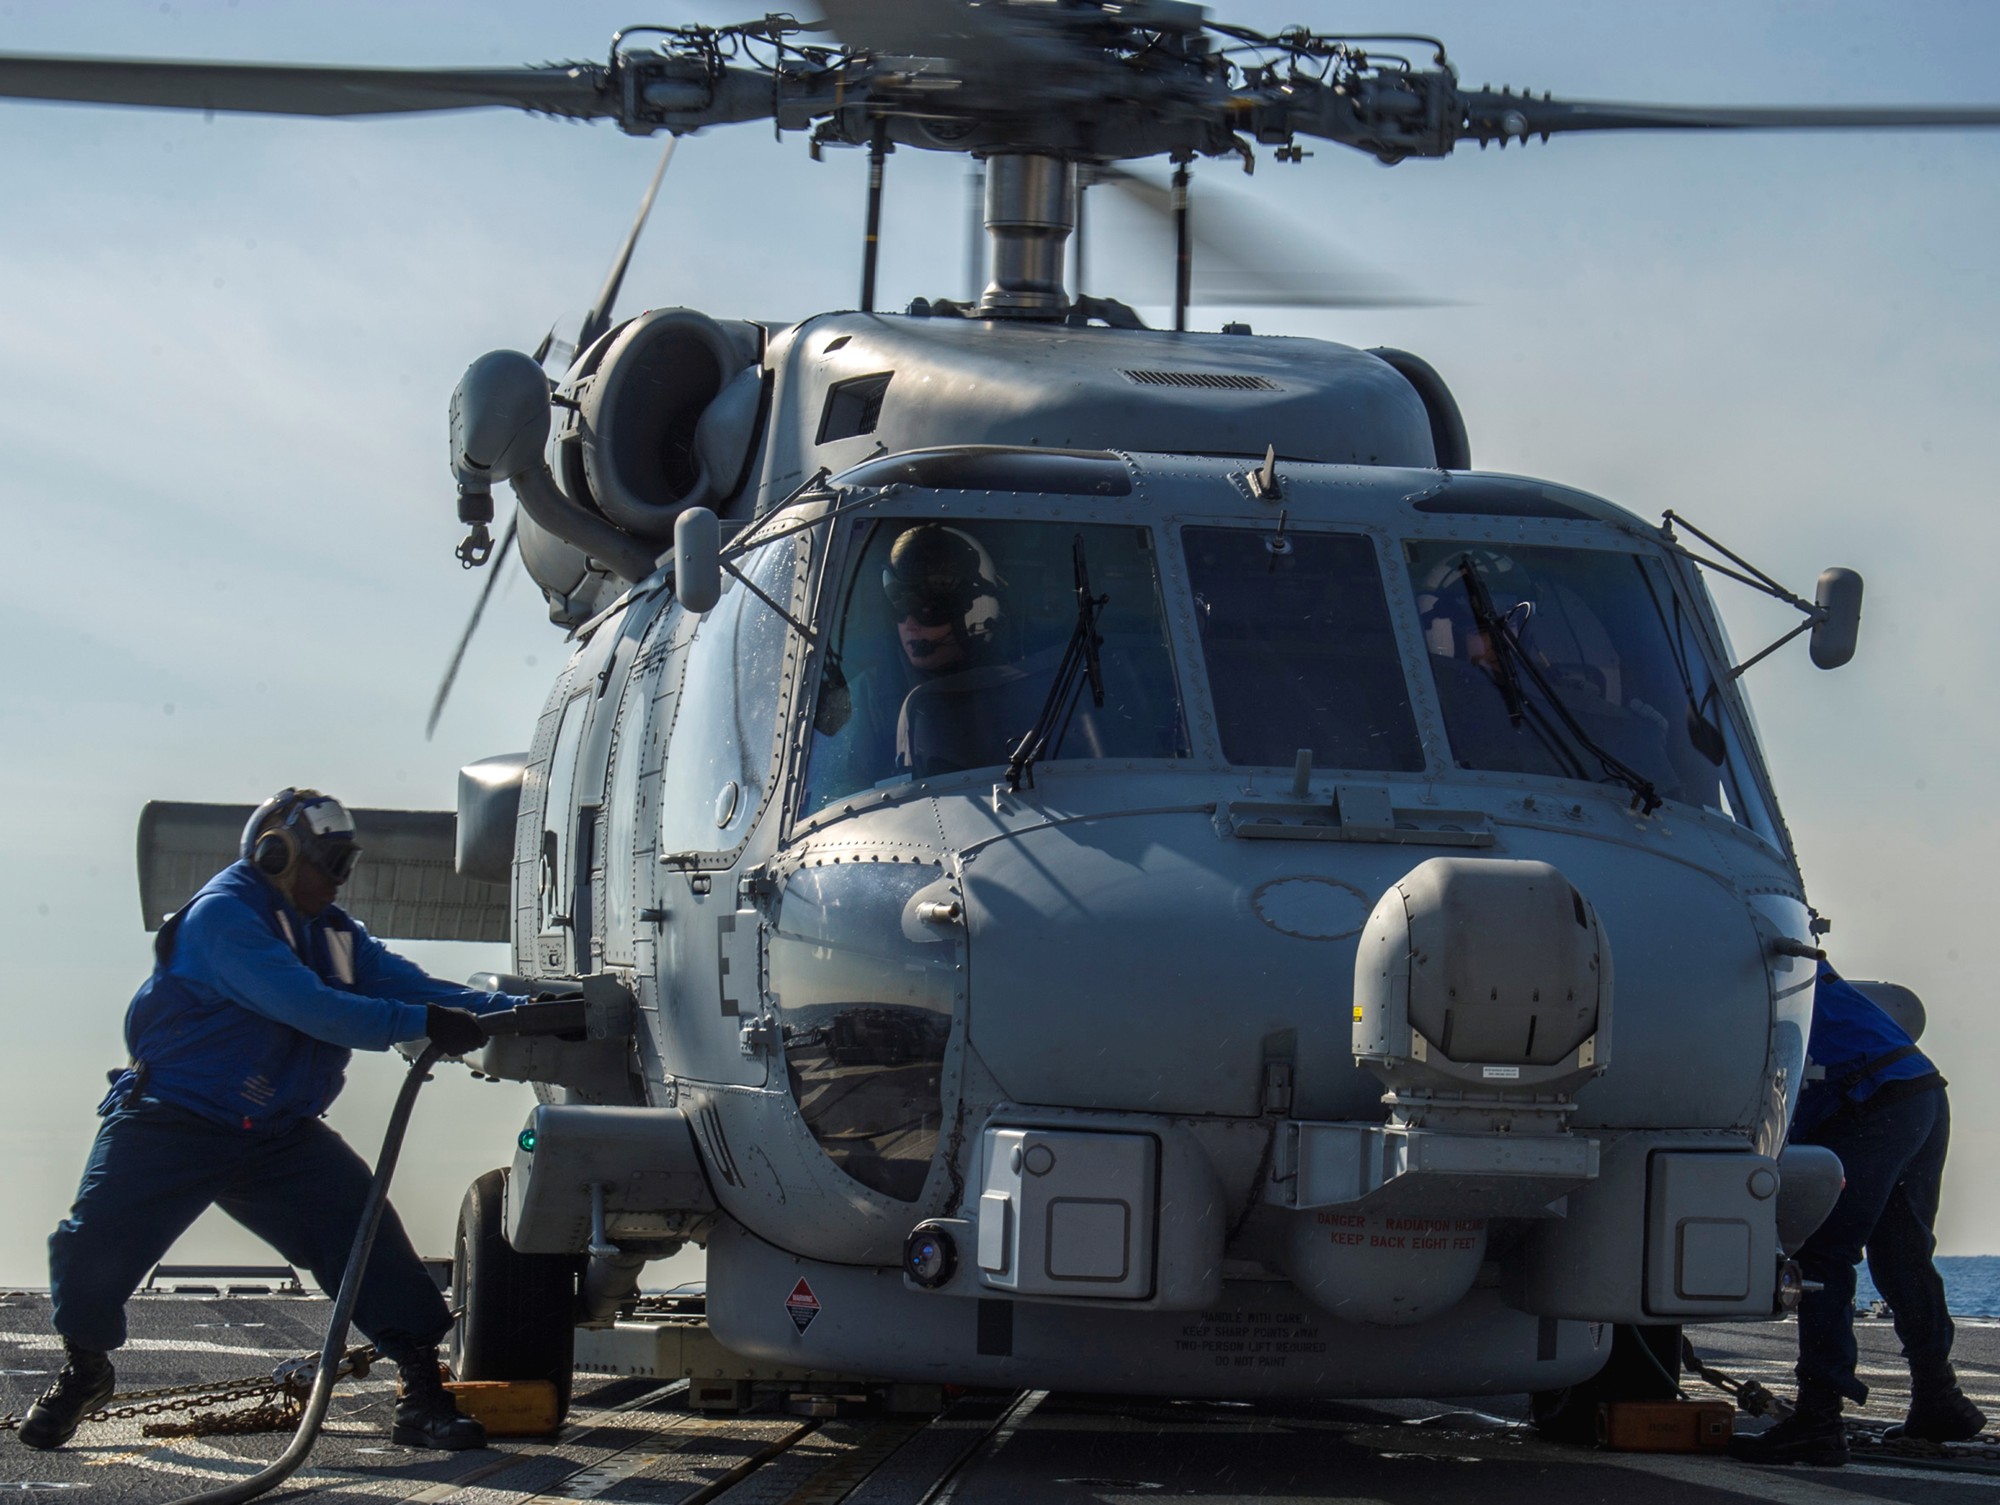 hsm-51 warlords helicopter maritime strike squadron mh-60r seahawk navy 2014 27